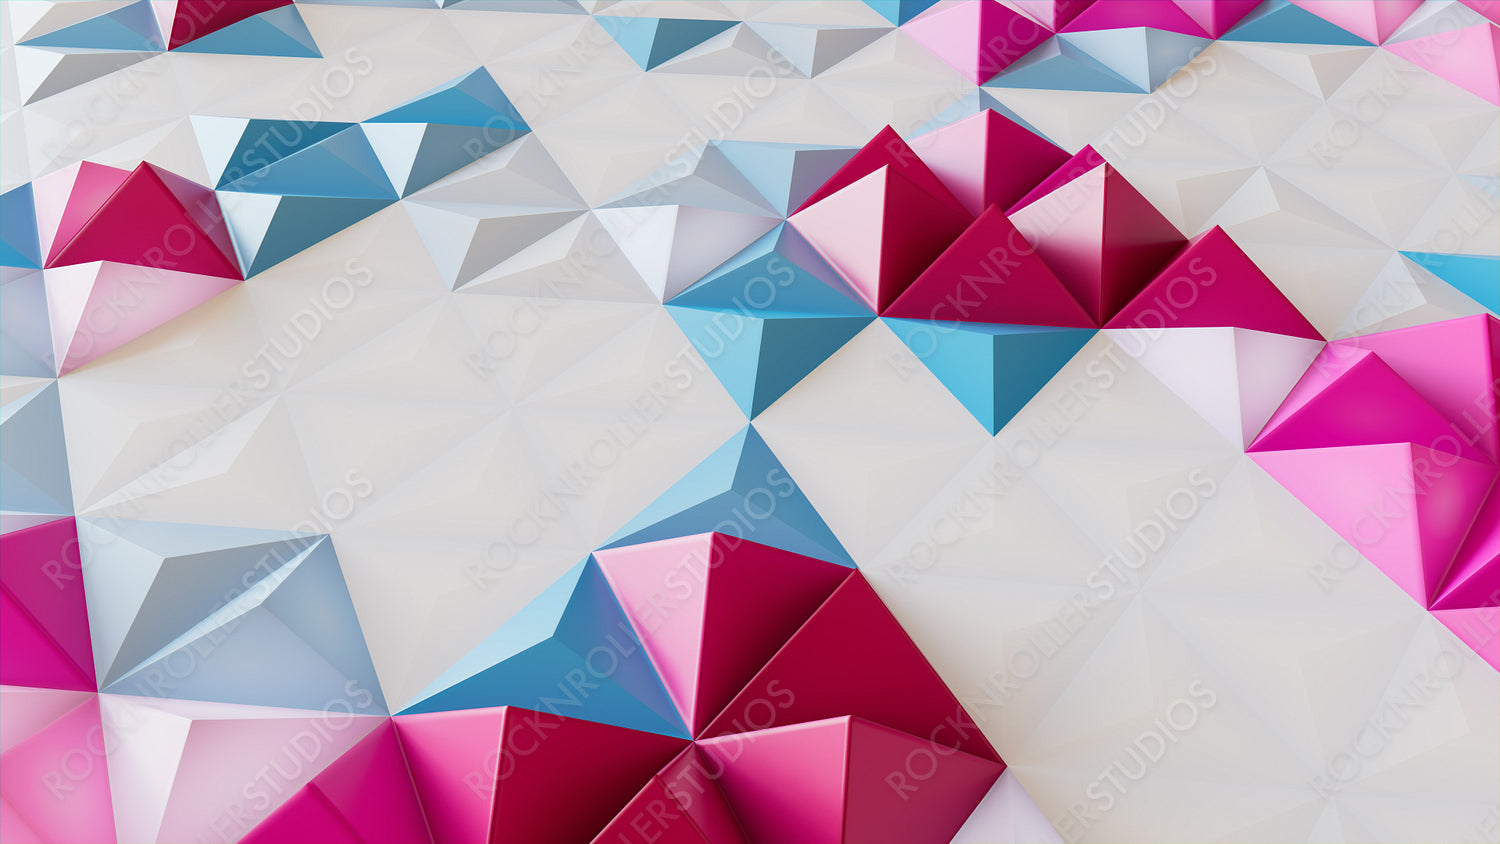 White, Blue and Pink Abstract Surface with Tetrahedrons. Modern, Bright 3d Background.